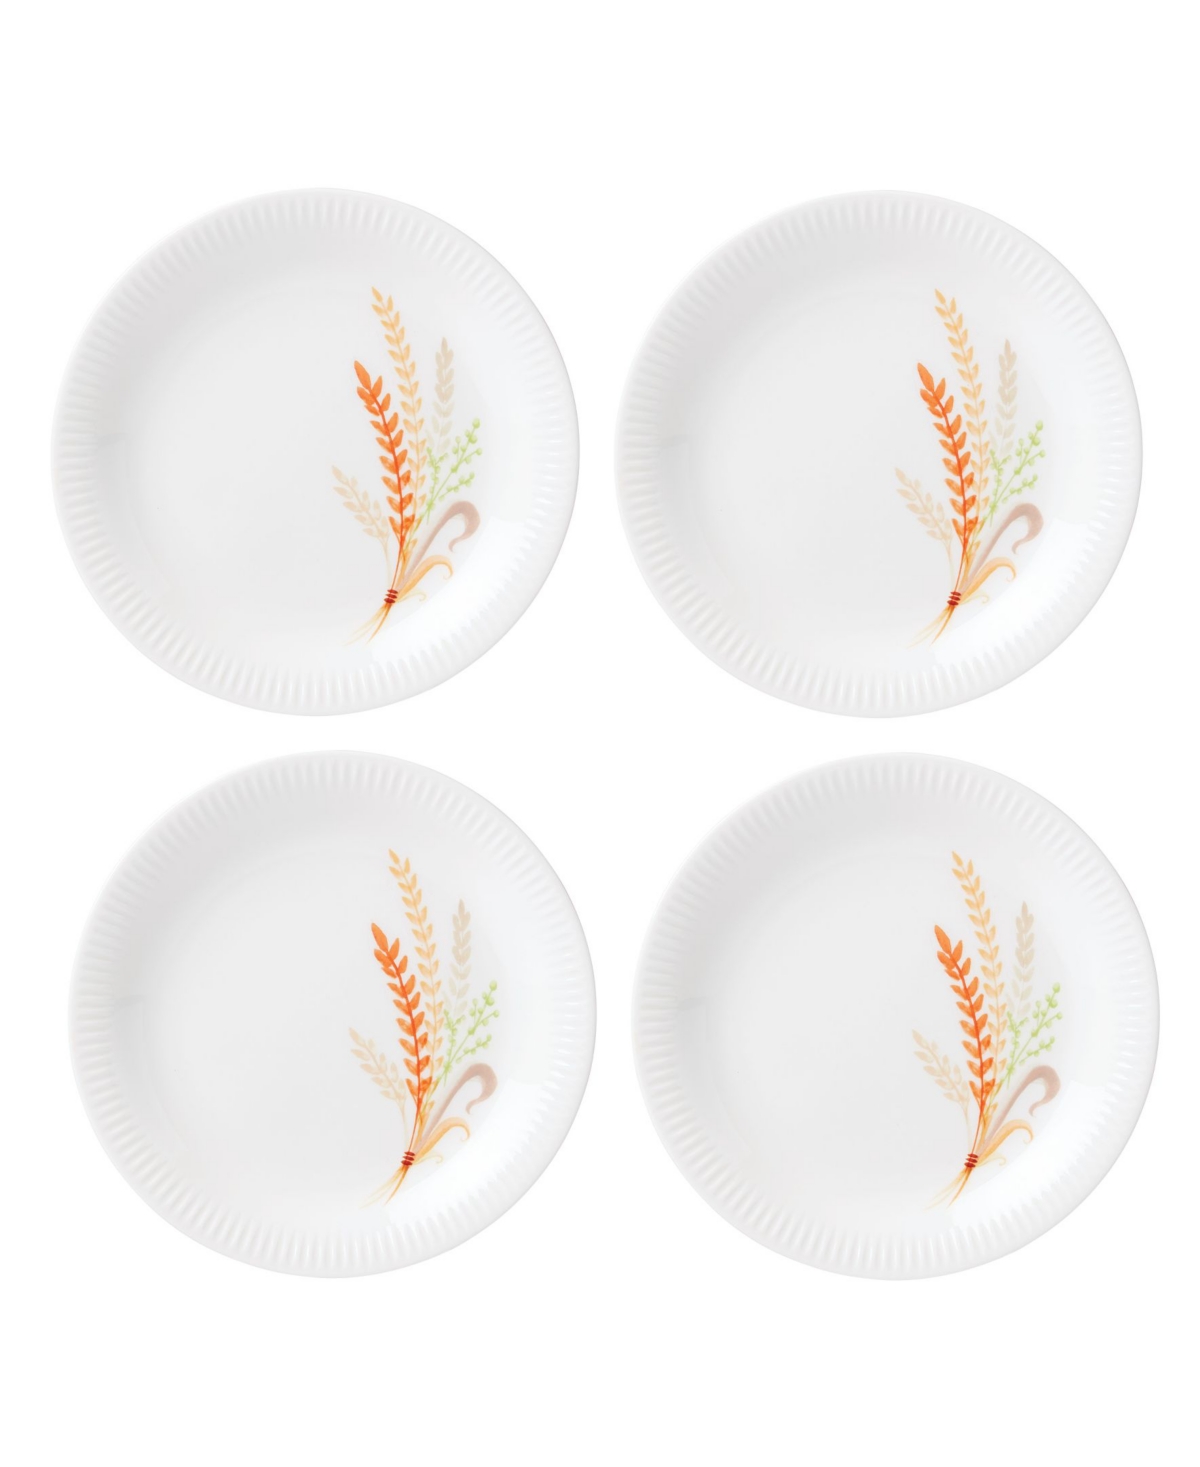 Profile Harvest Accent Plate, Set of 4